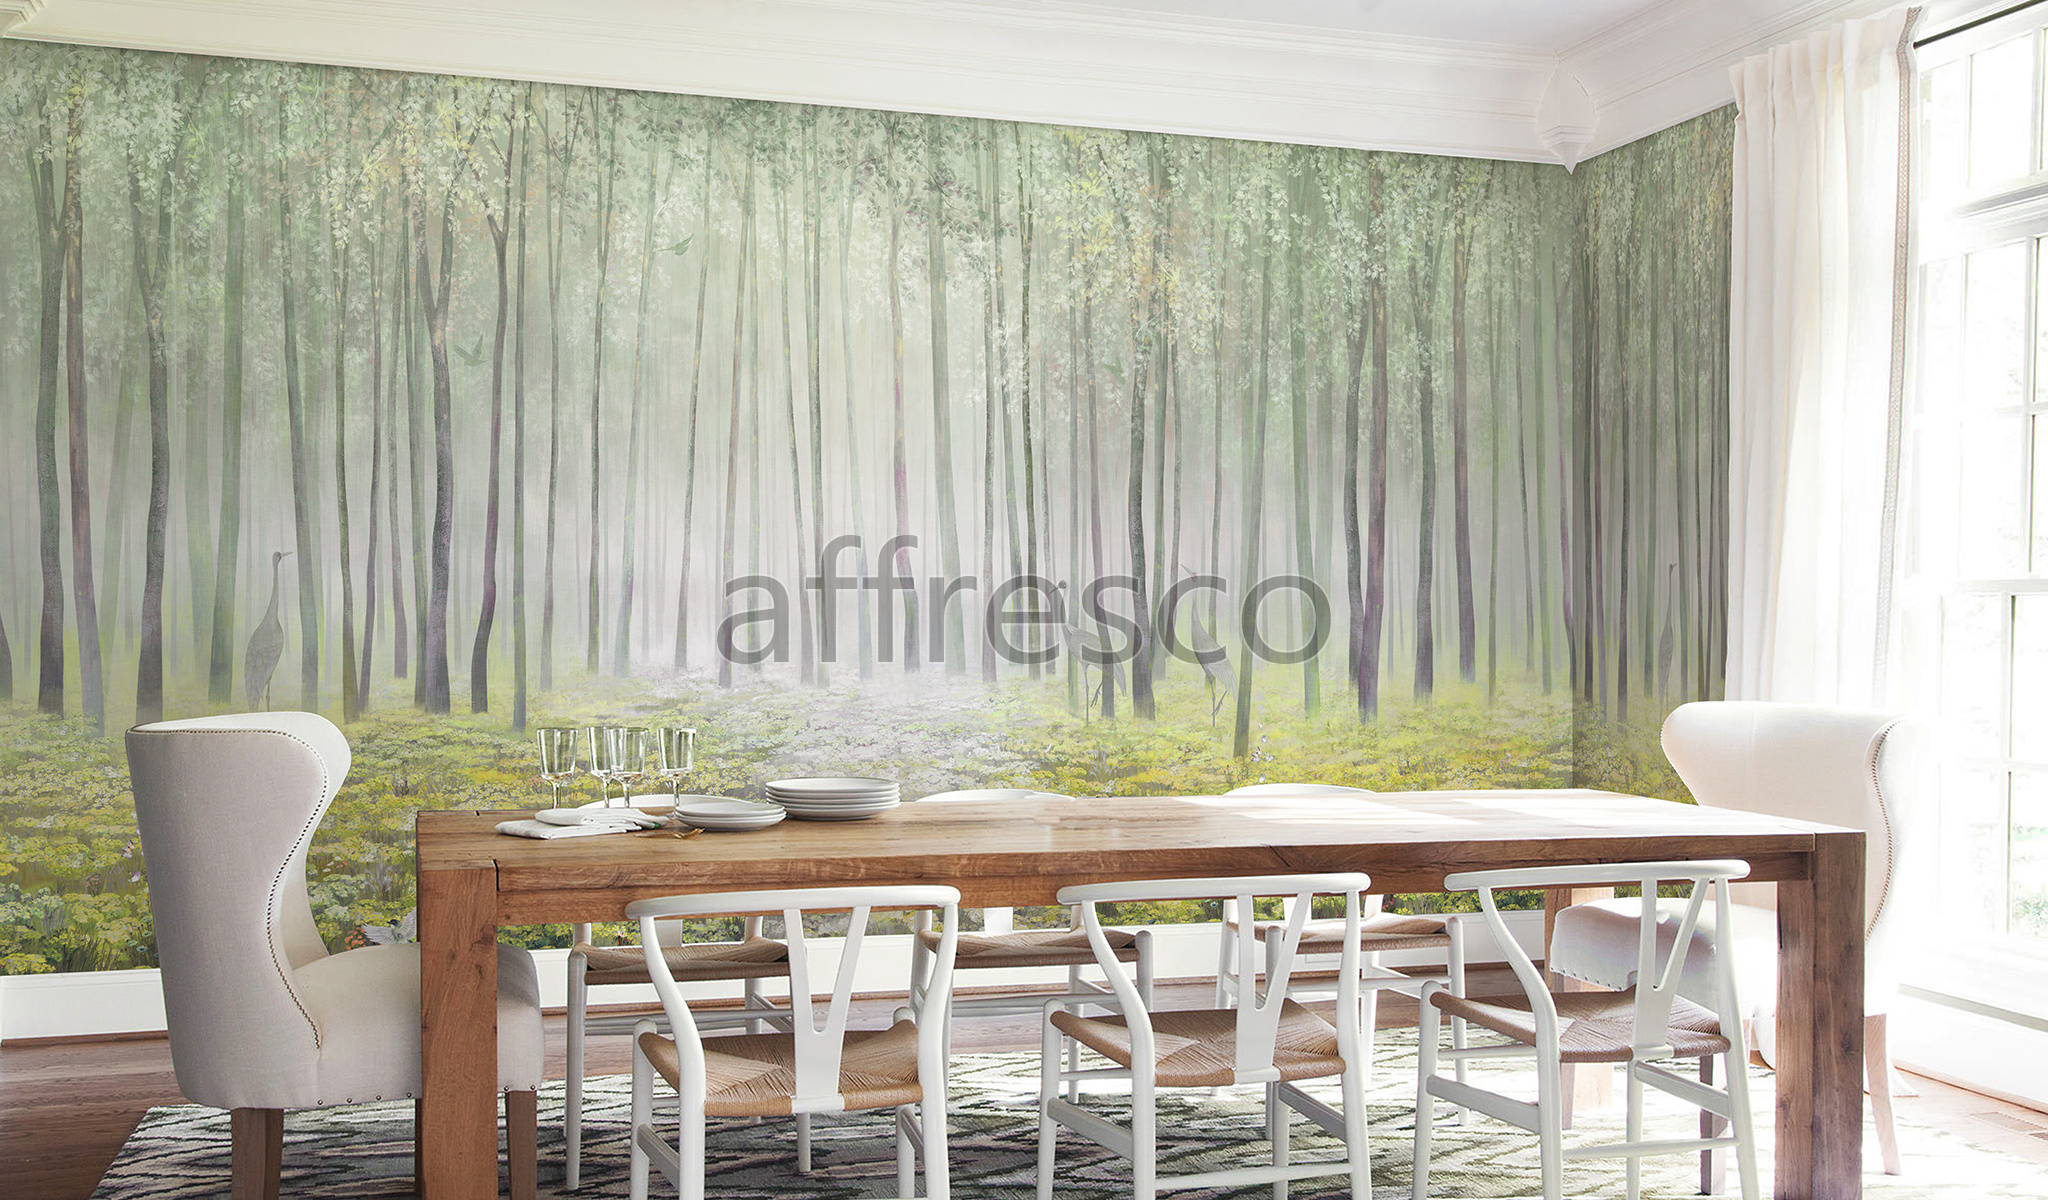 Handmade wallpaper, Forest with Forget-me-nots